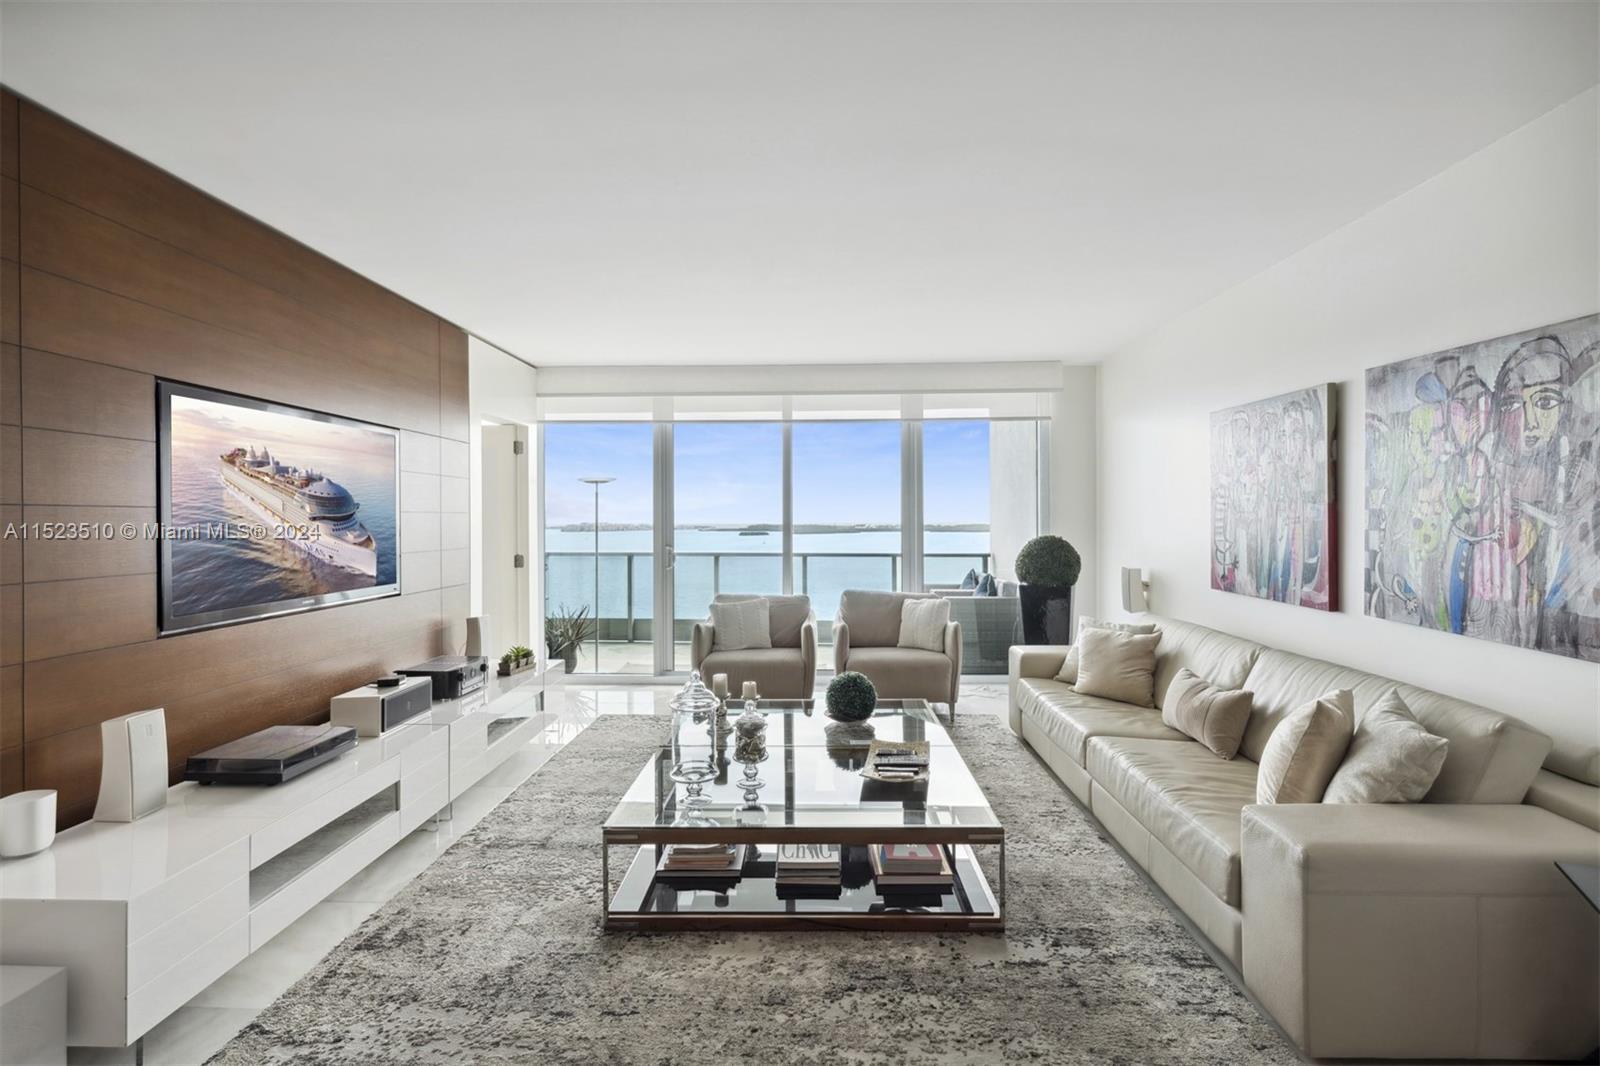 Uncover unmatched Biscayne Bay views from this gem in the Miami skyline. Enjoy vibrant living on spacious balconies, complemented by a private elevator foyer. The residence boasts an elegant kitchen, marble floors, Italian cabinetry, and top-tier appliances. Indulge in world-class amenities—bayfront pools, fitness center, spa, concierge, valet, and a sky-high club room. Perfectly located for easy access to dining and entertainment, bypassing Brickell traffic. Elevate your lifestyle with breathtaking views, luxury, and prime Miami living—a sophisticated sanctuary in the heart of the city.

Act quickly – seize the final opportunity for a three-bedroom residence in the building. Don't miss out.